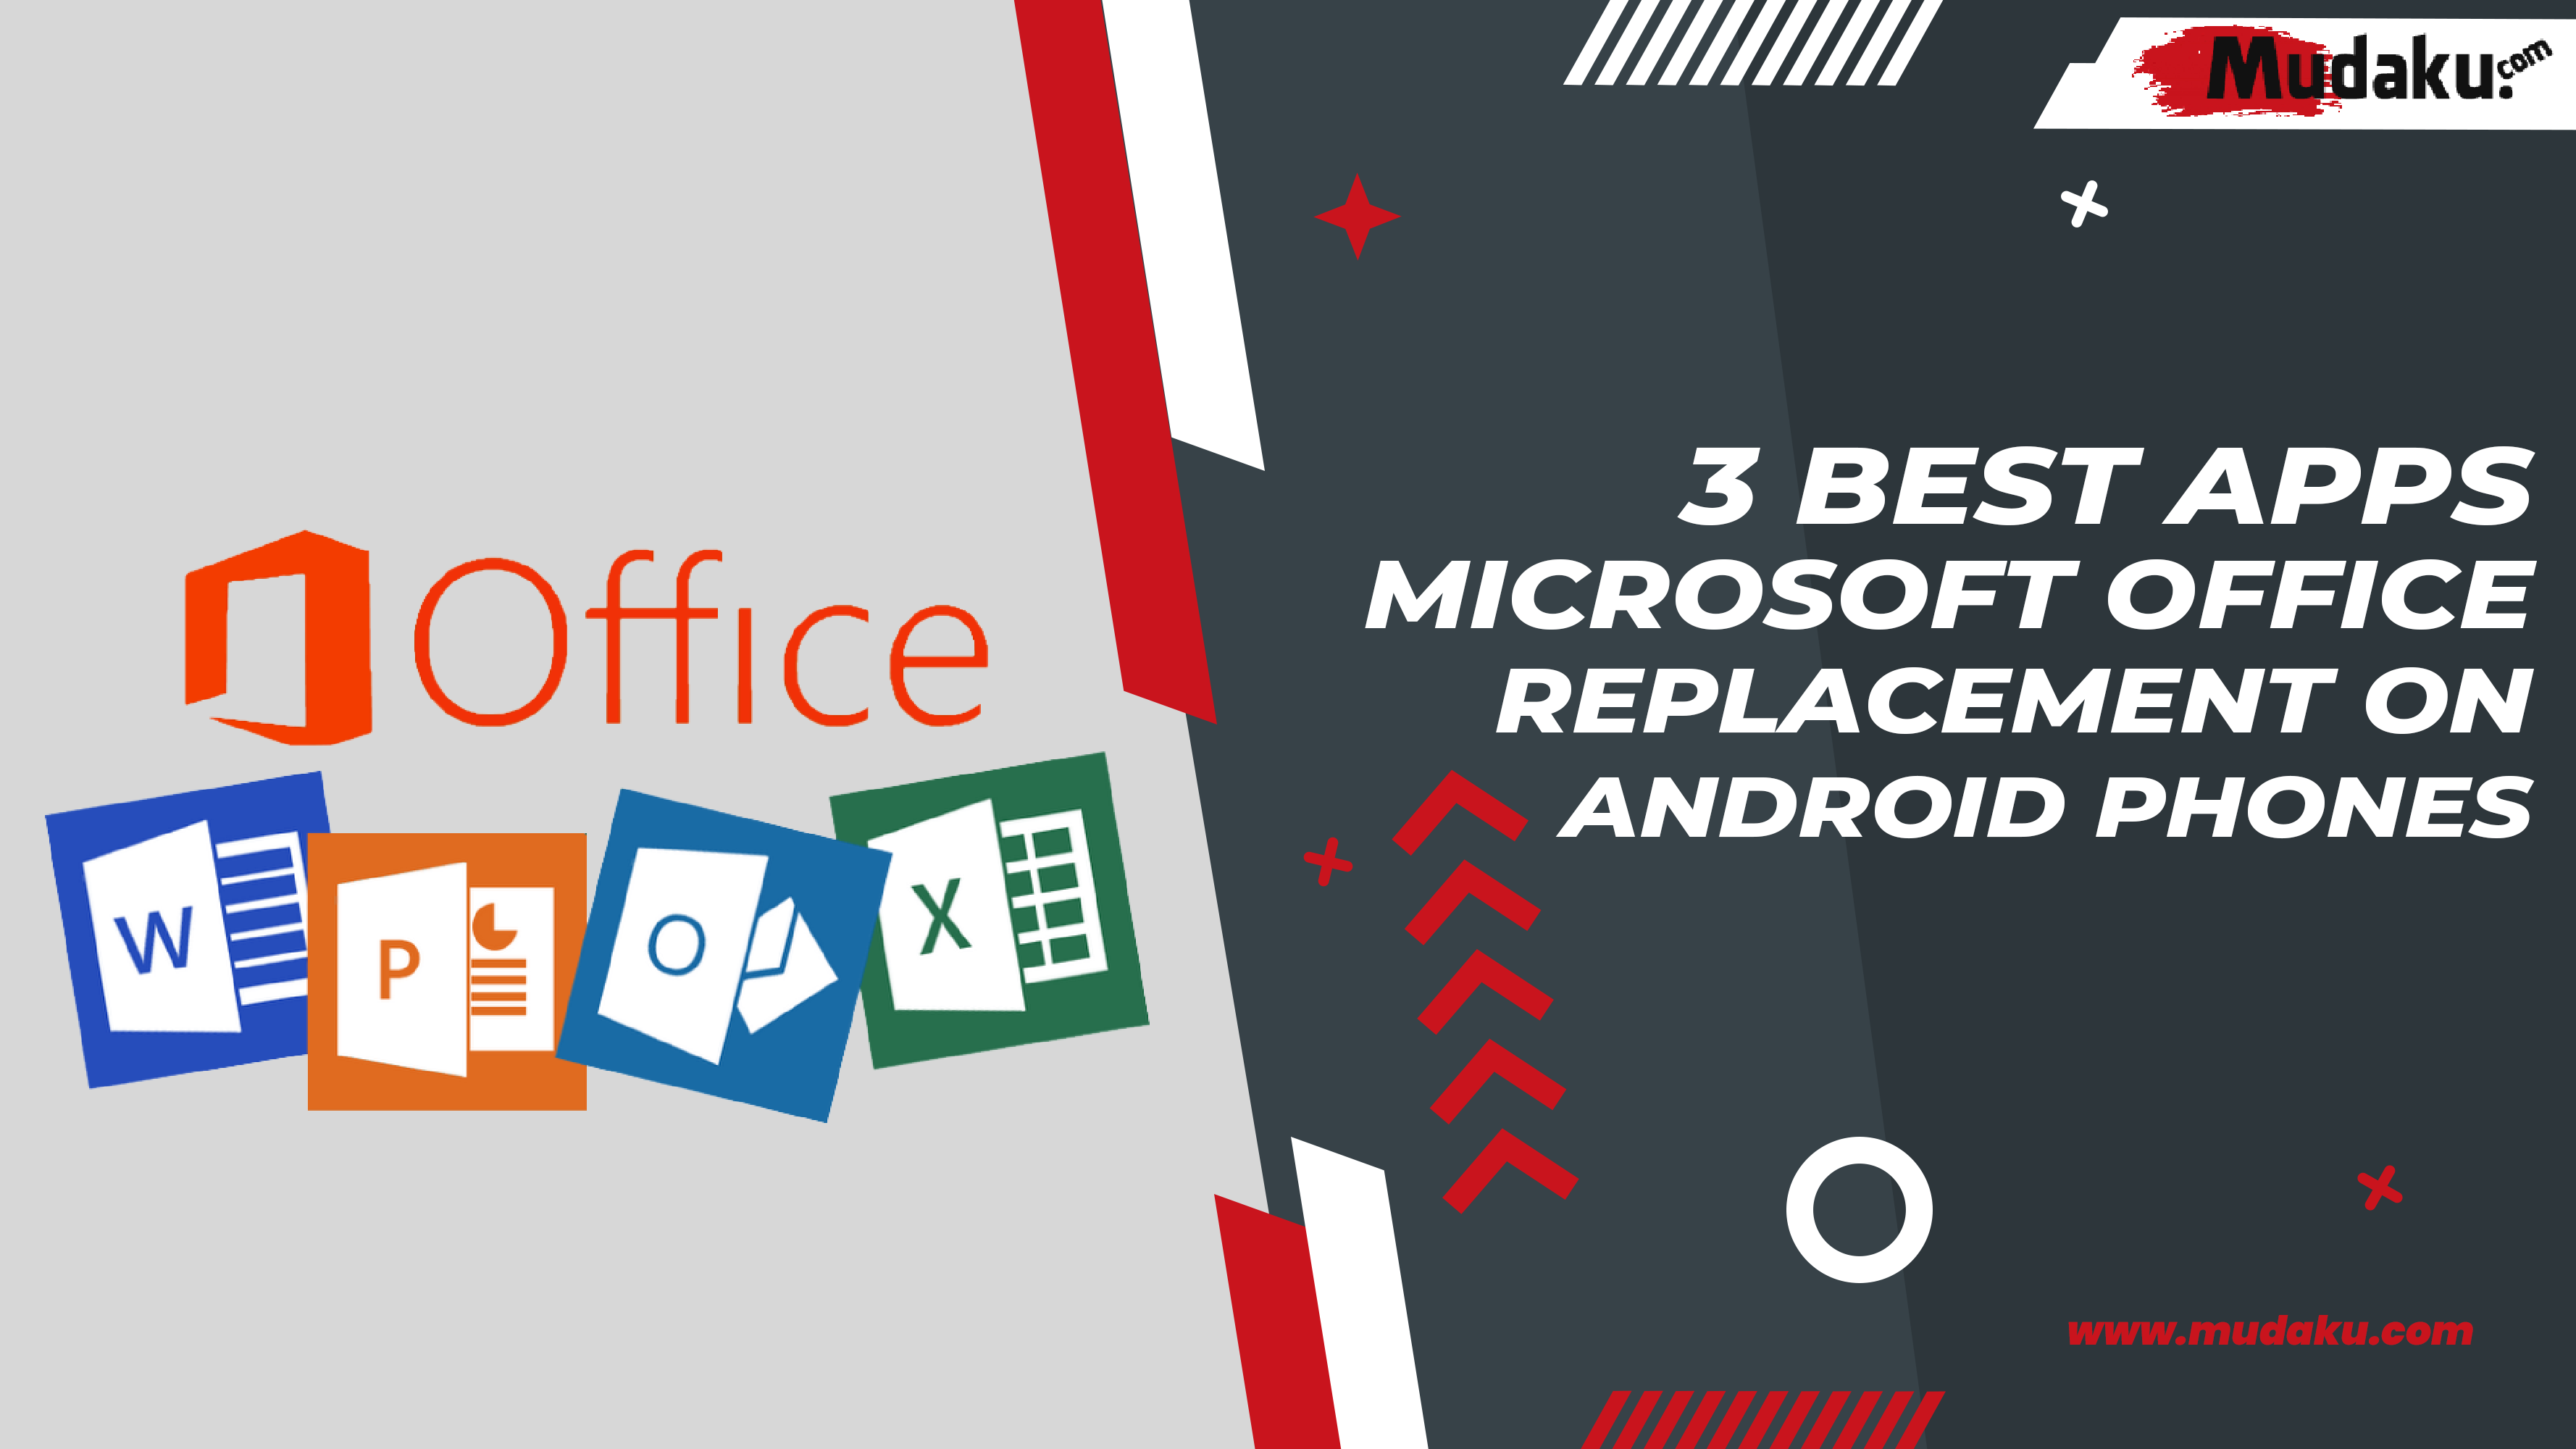 3 Best Apps Microsoft Office Replacement on Android Phones